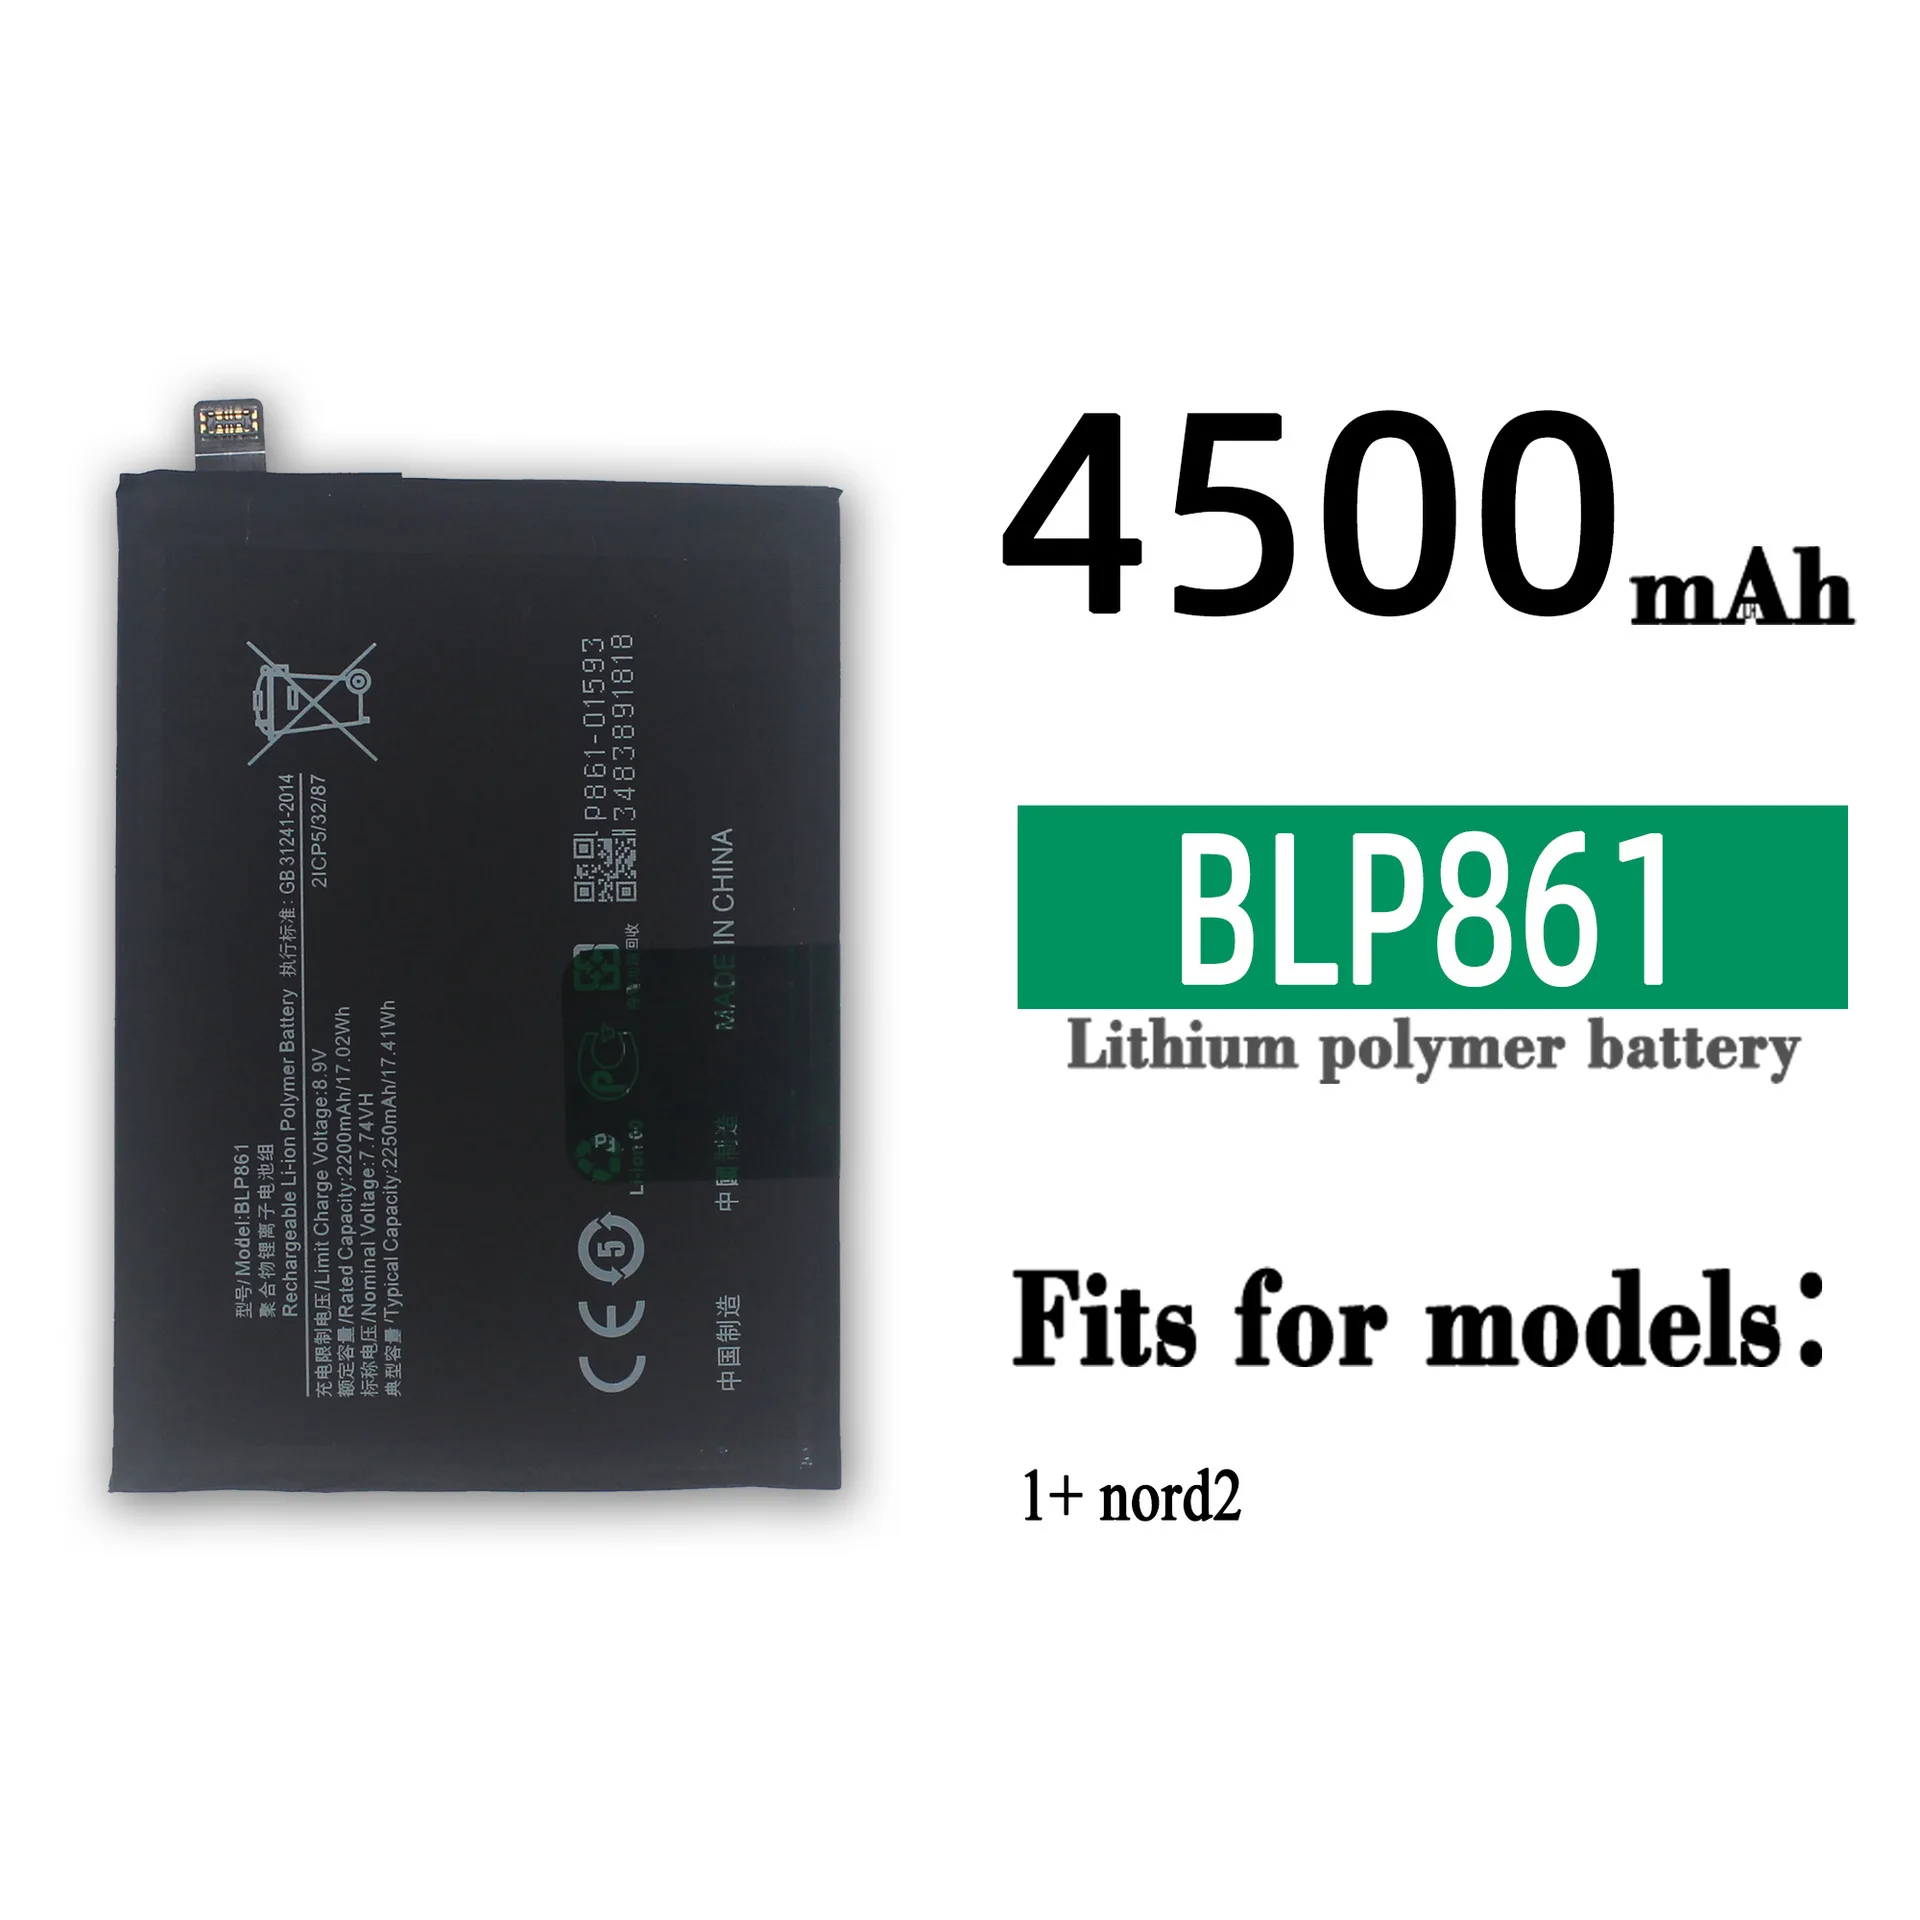 

BLP861 Orginal Replacement Battery For OPPO Oneplus 1+ nord2 BLP 861 2250mAh High Quality Mobile Phone Large Capacity Batteries